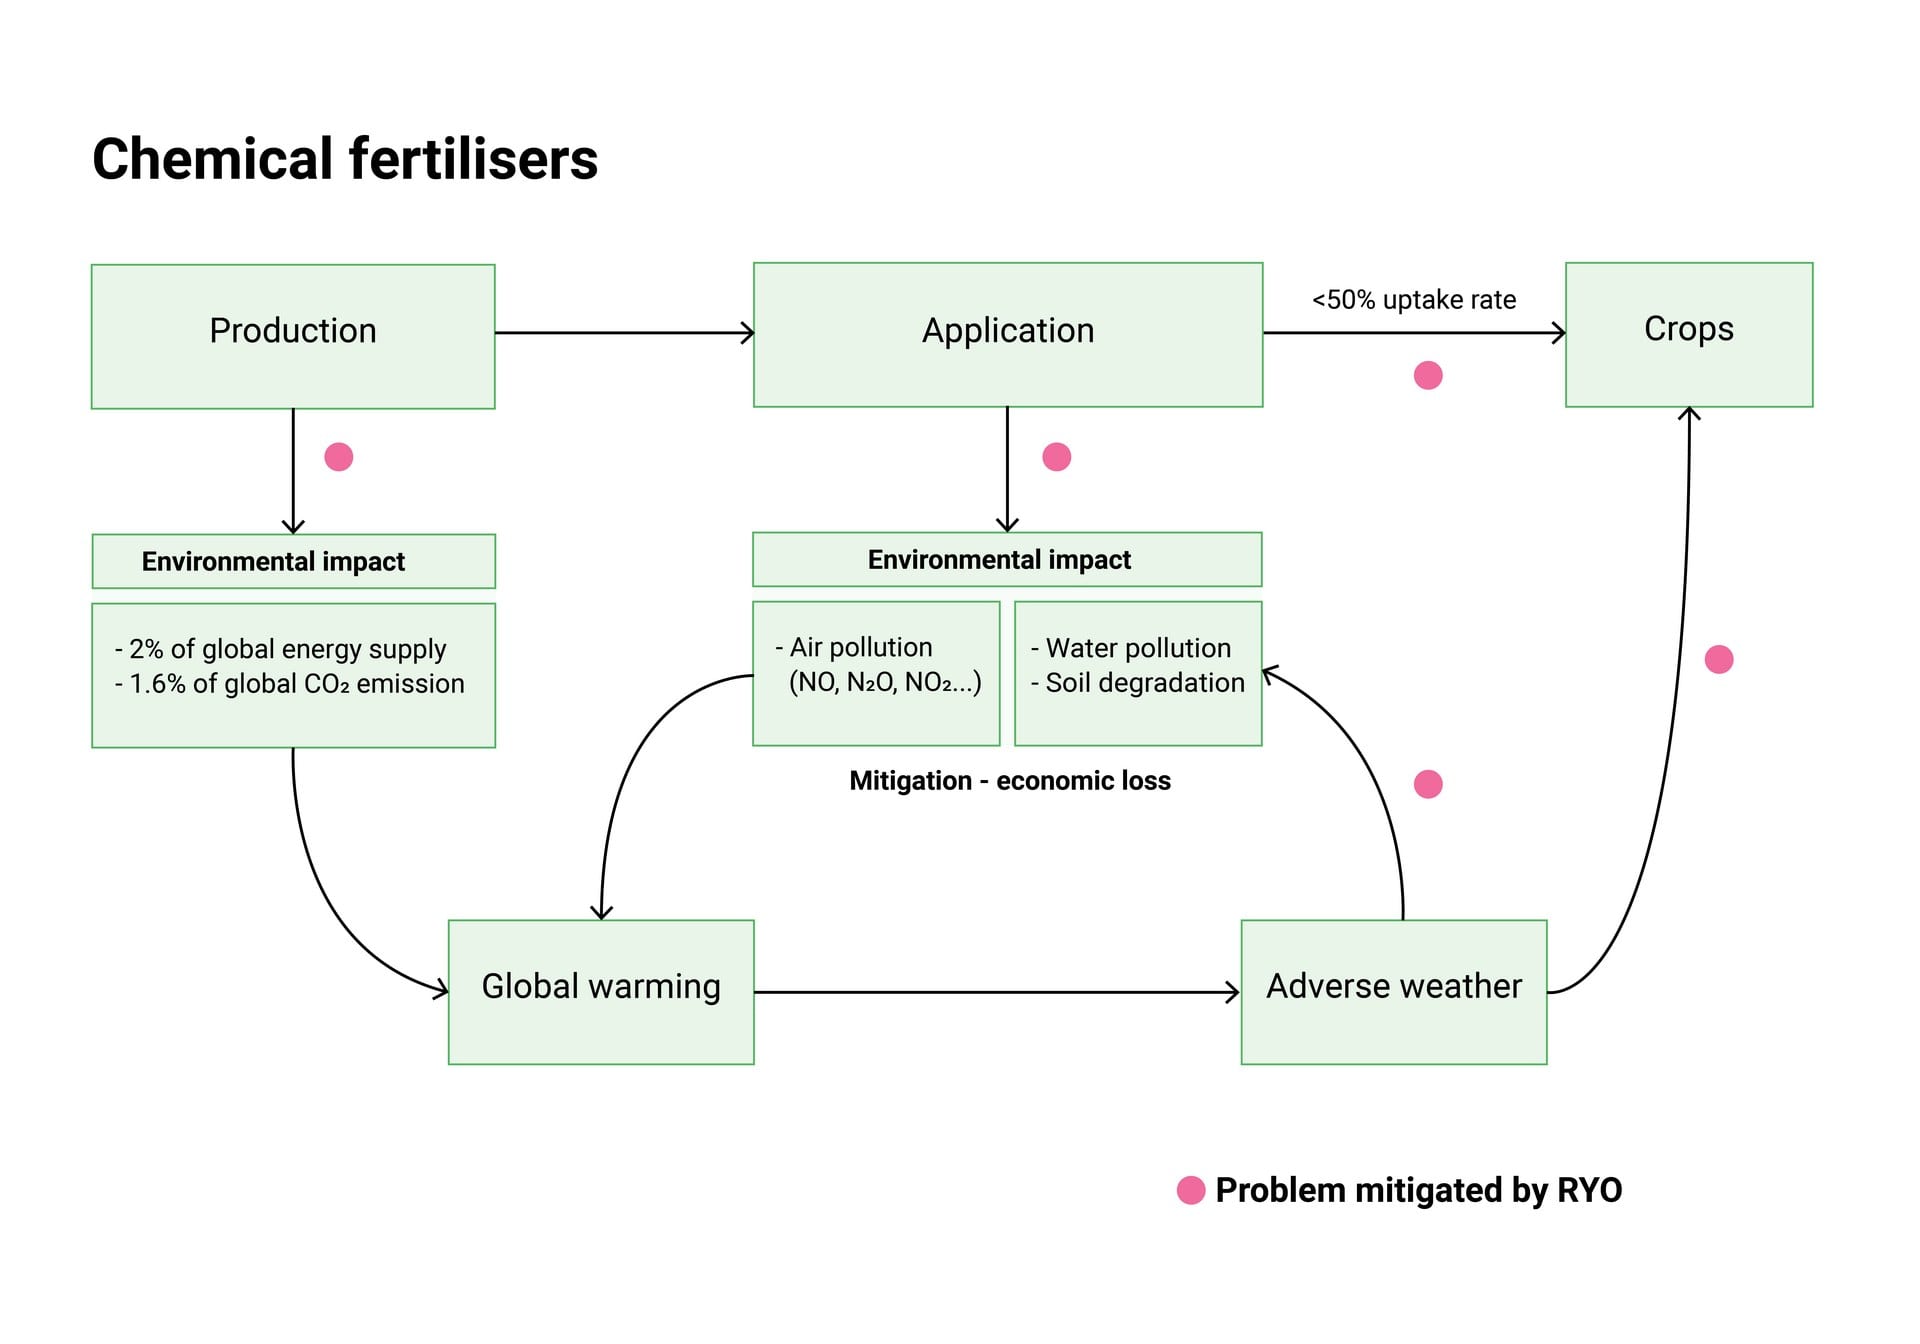 Systematic problems of chemical fertilisers